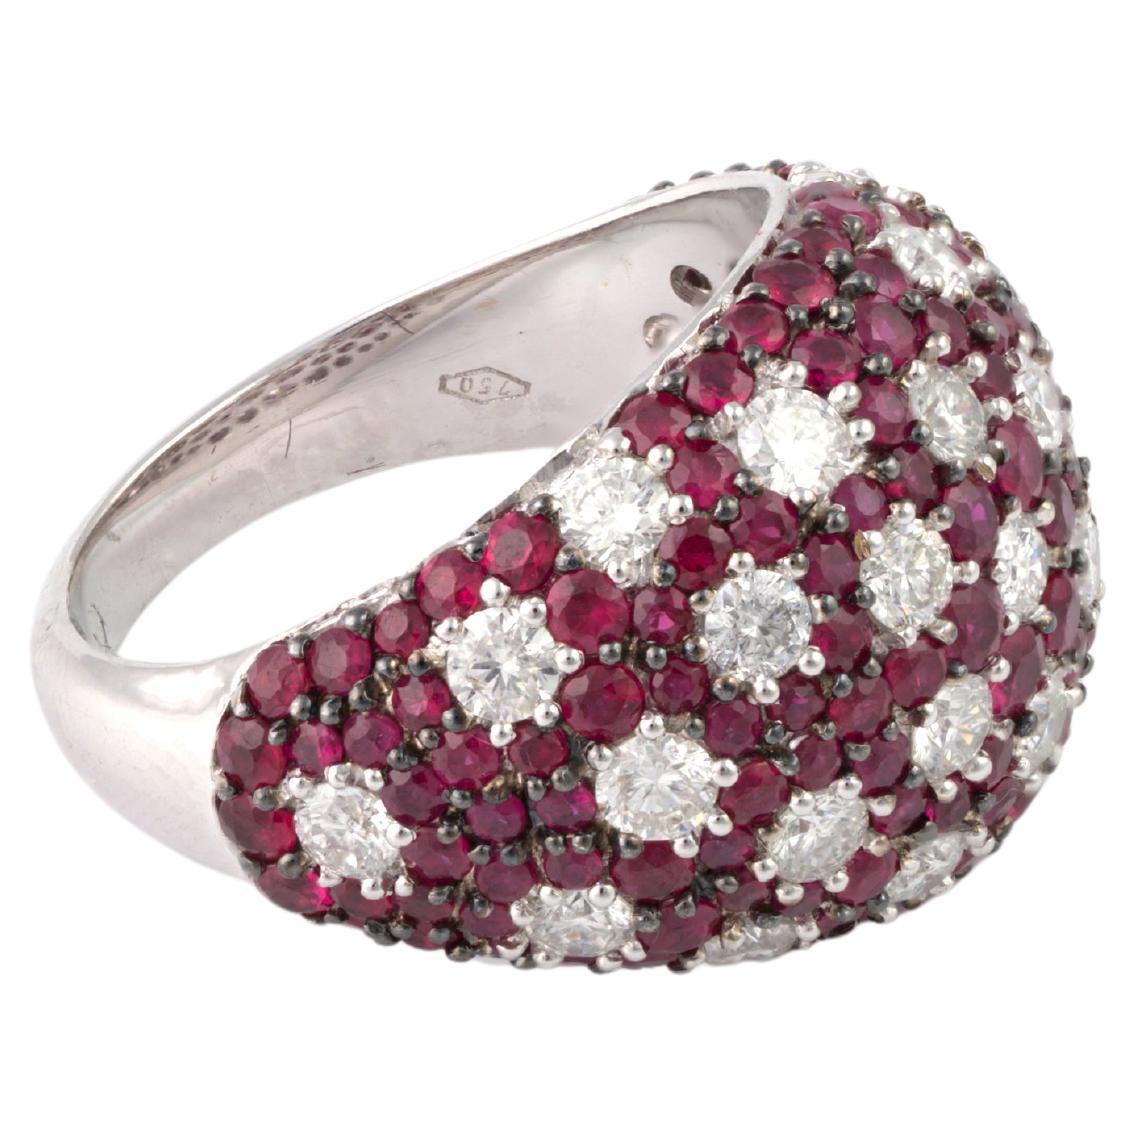 Natural Ruby Ring 3.42 Carats and Diamonds 0.26 Carats in 18k Gold